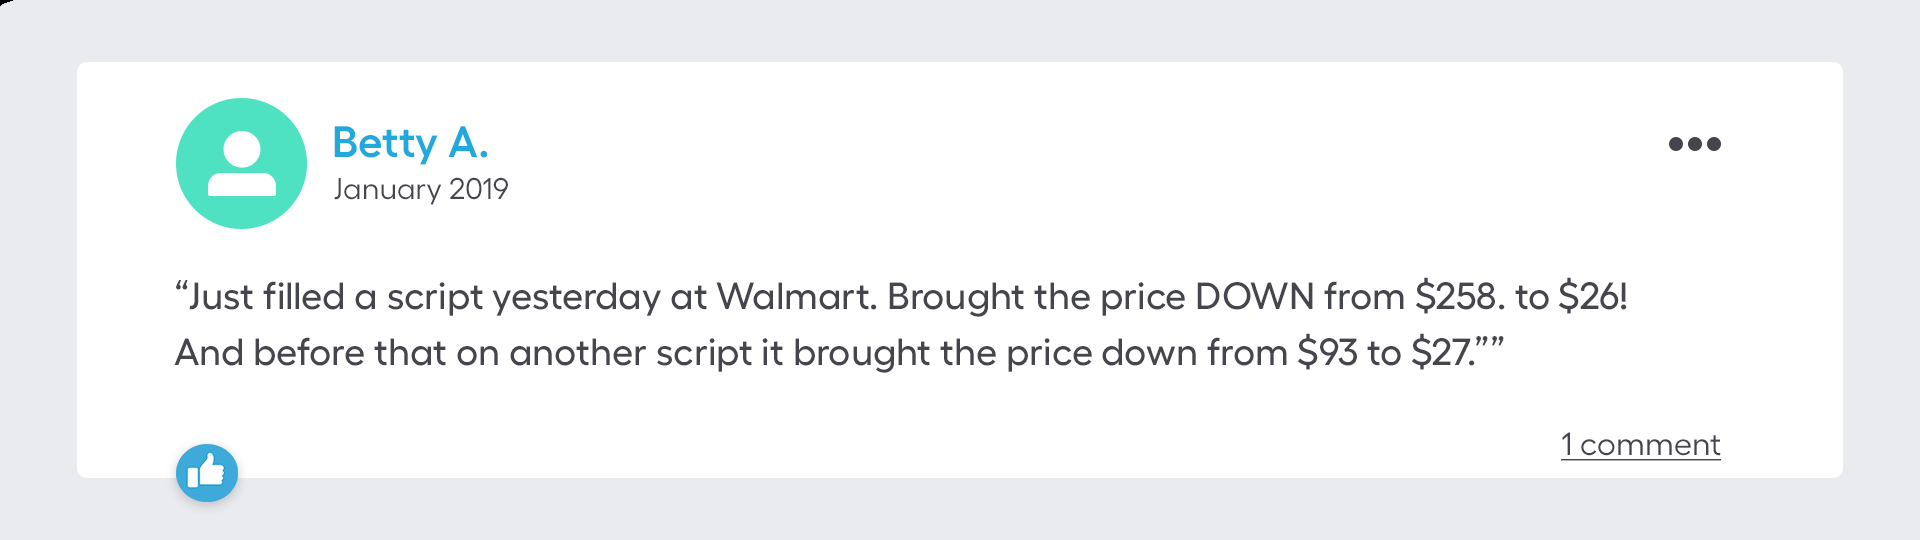 Just filled a script yesterday at Walmart. Brought the price DOWN from $258. to $26! And before that on another script it brought the price down from $93 to $27.